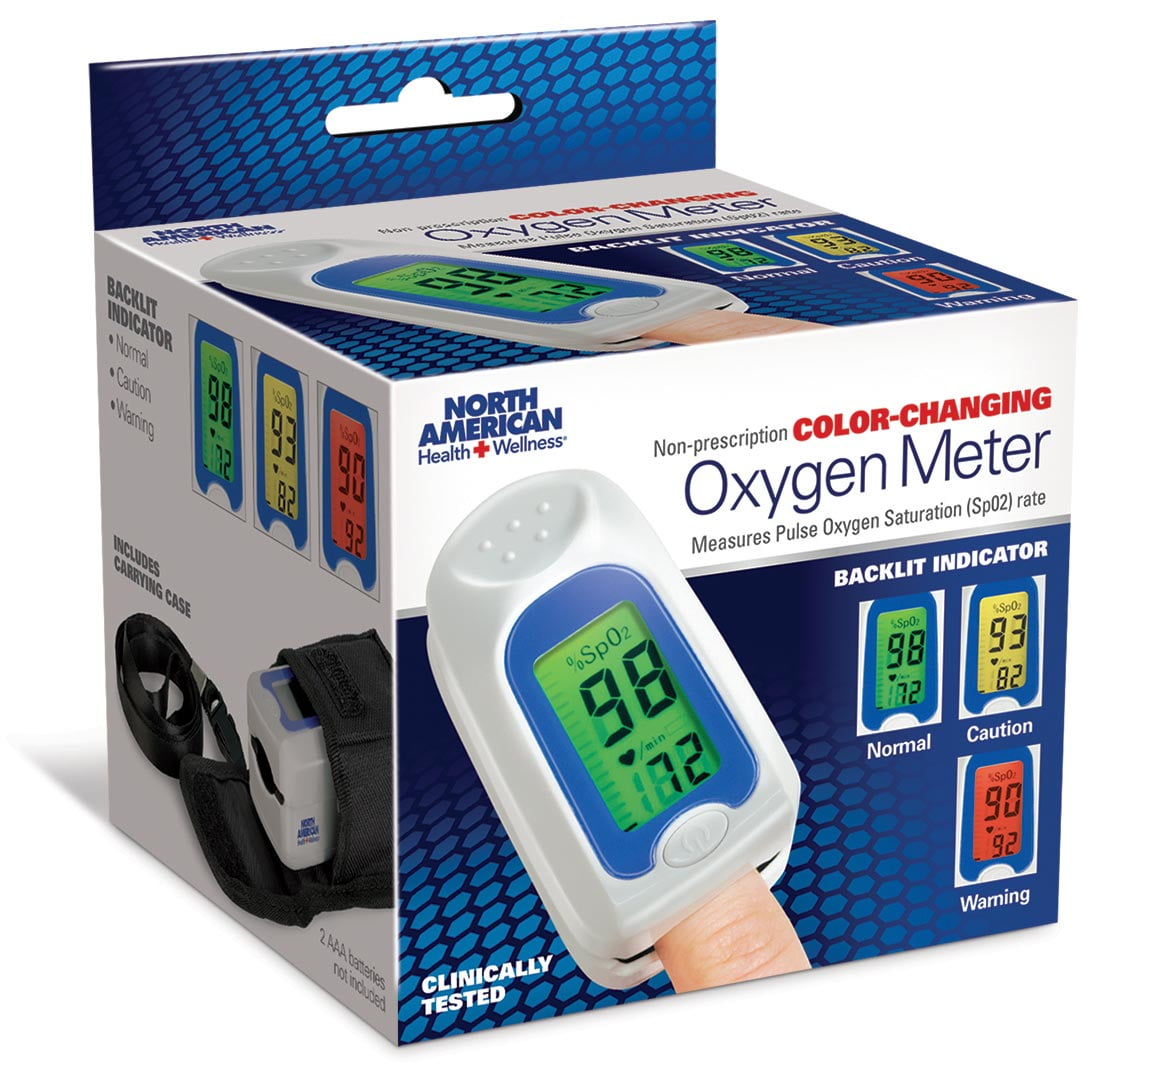 Oxiline Pulse 7 Pro Oximeter #Why #Oximeter #Review 